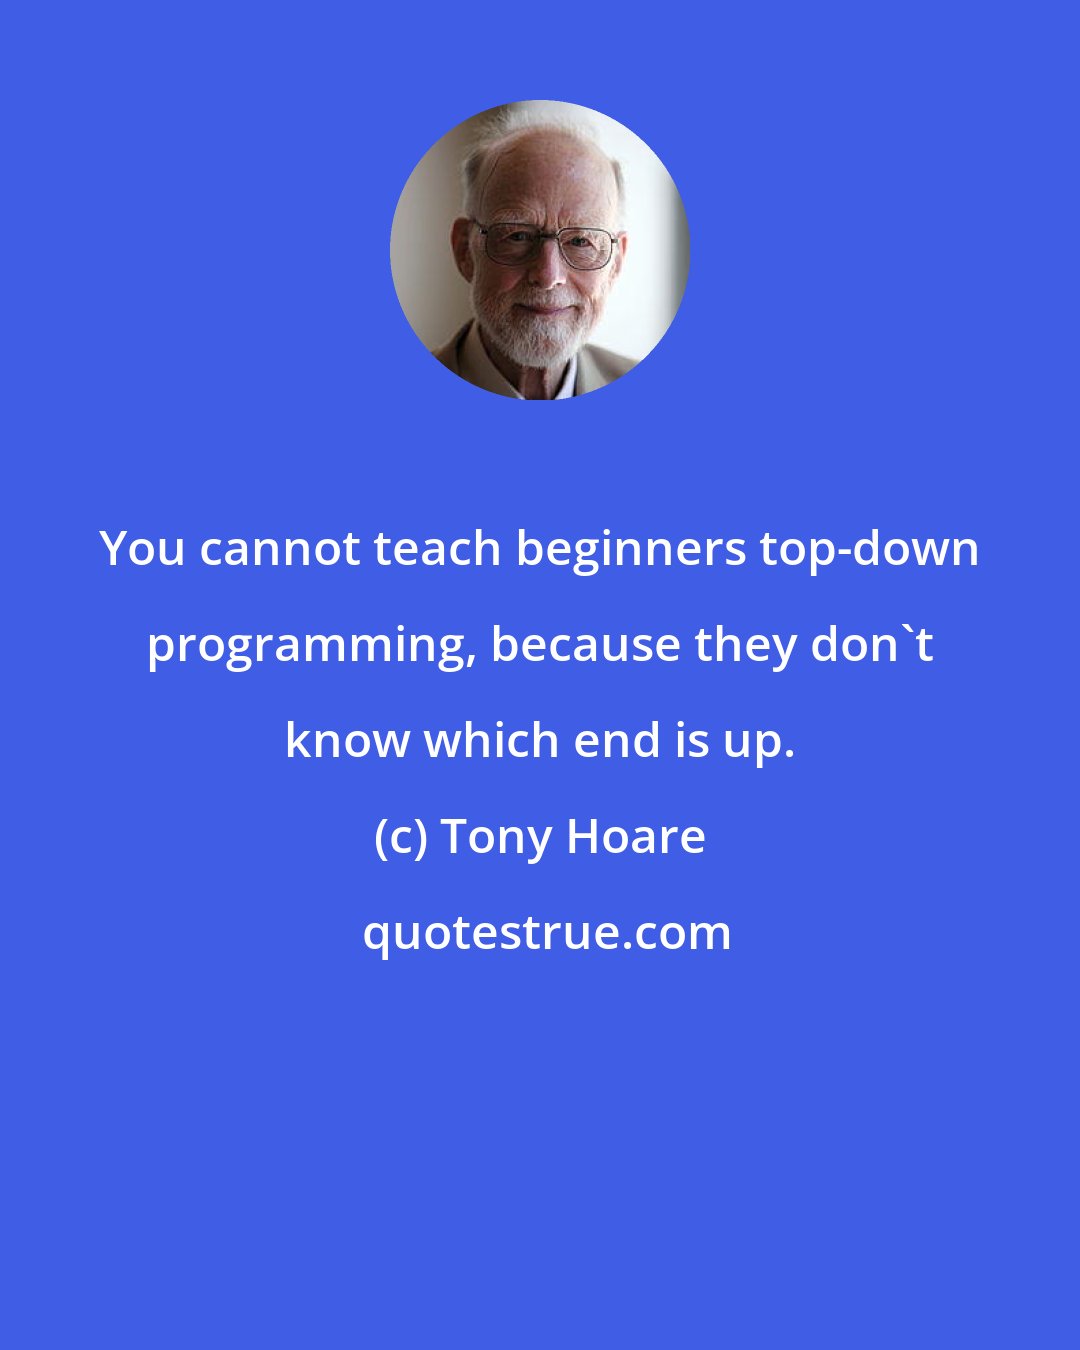 Tony Hoare: You cannot teach beginners top-down programming, because they don't know which end is up.